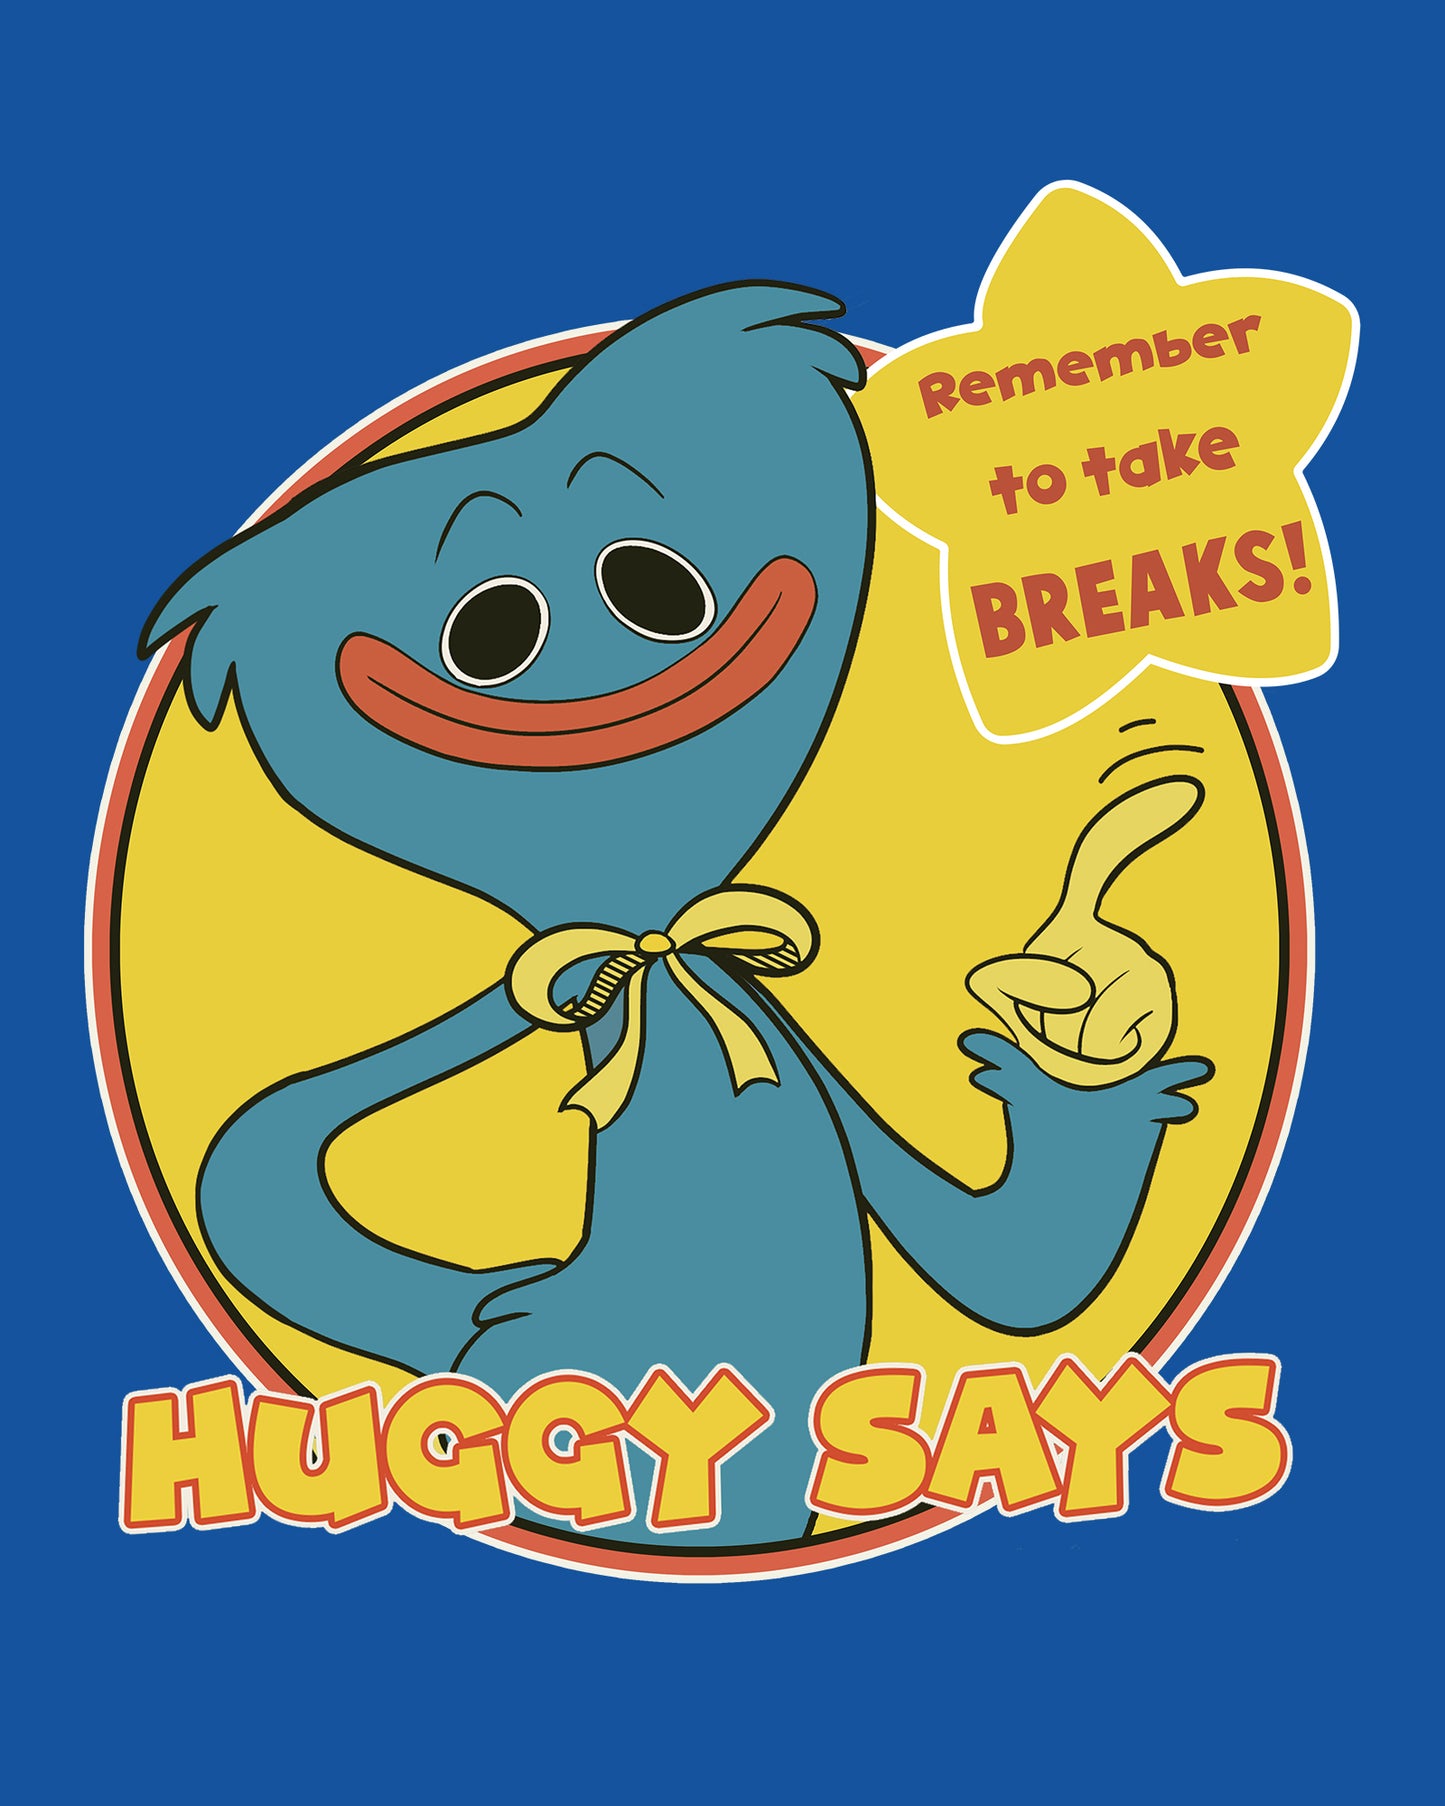 image on shirt: happy huggy wuggy smiling and pointing. star has text: remember to take breaks! text on bottom of shirt: huggy says